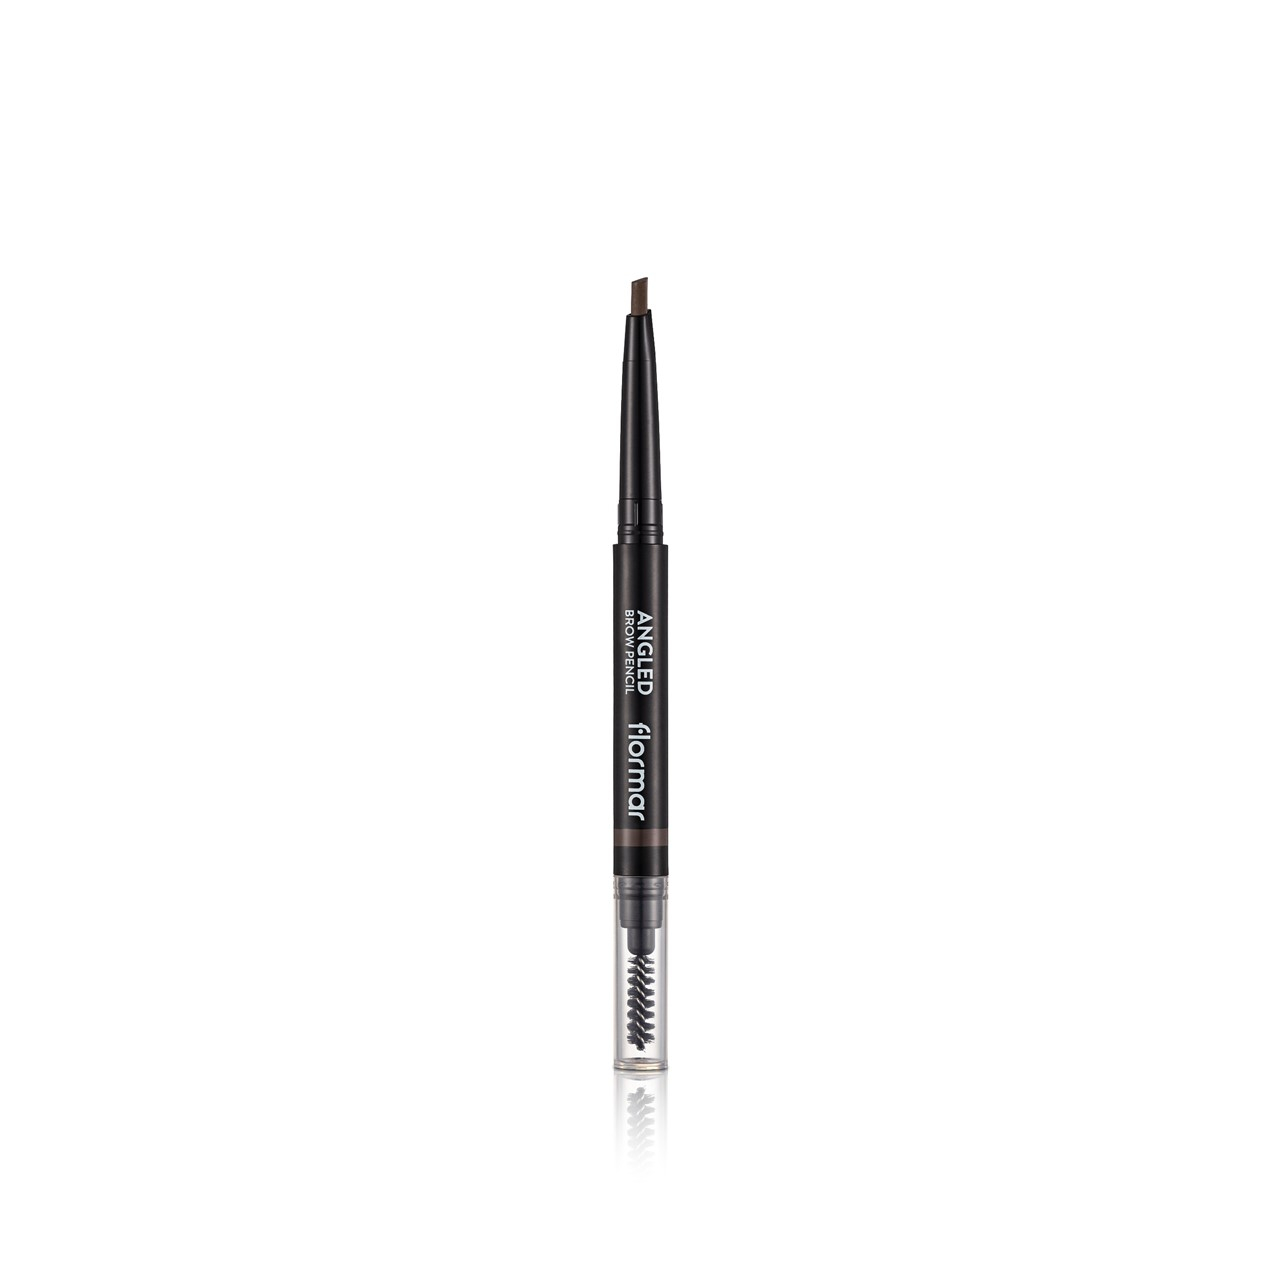 Flormar Angled Brow Pencil 01 Beige 0.28g